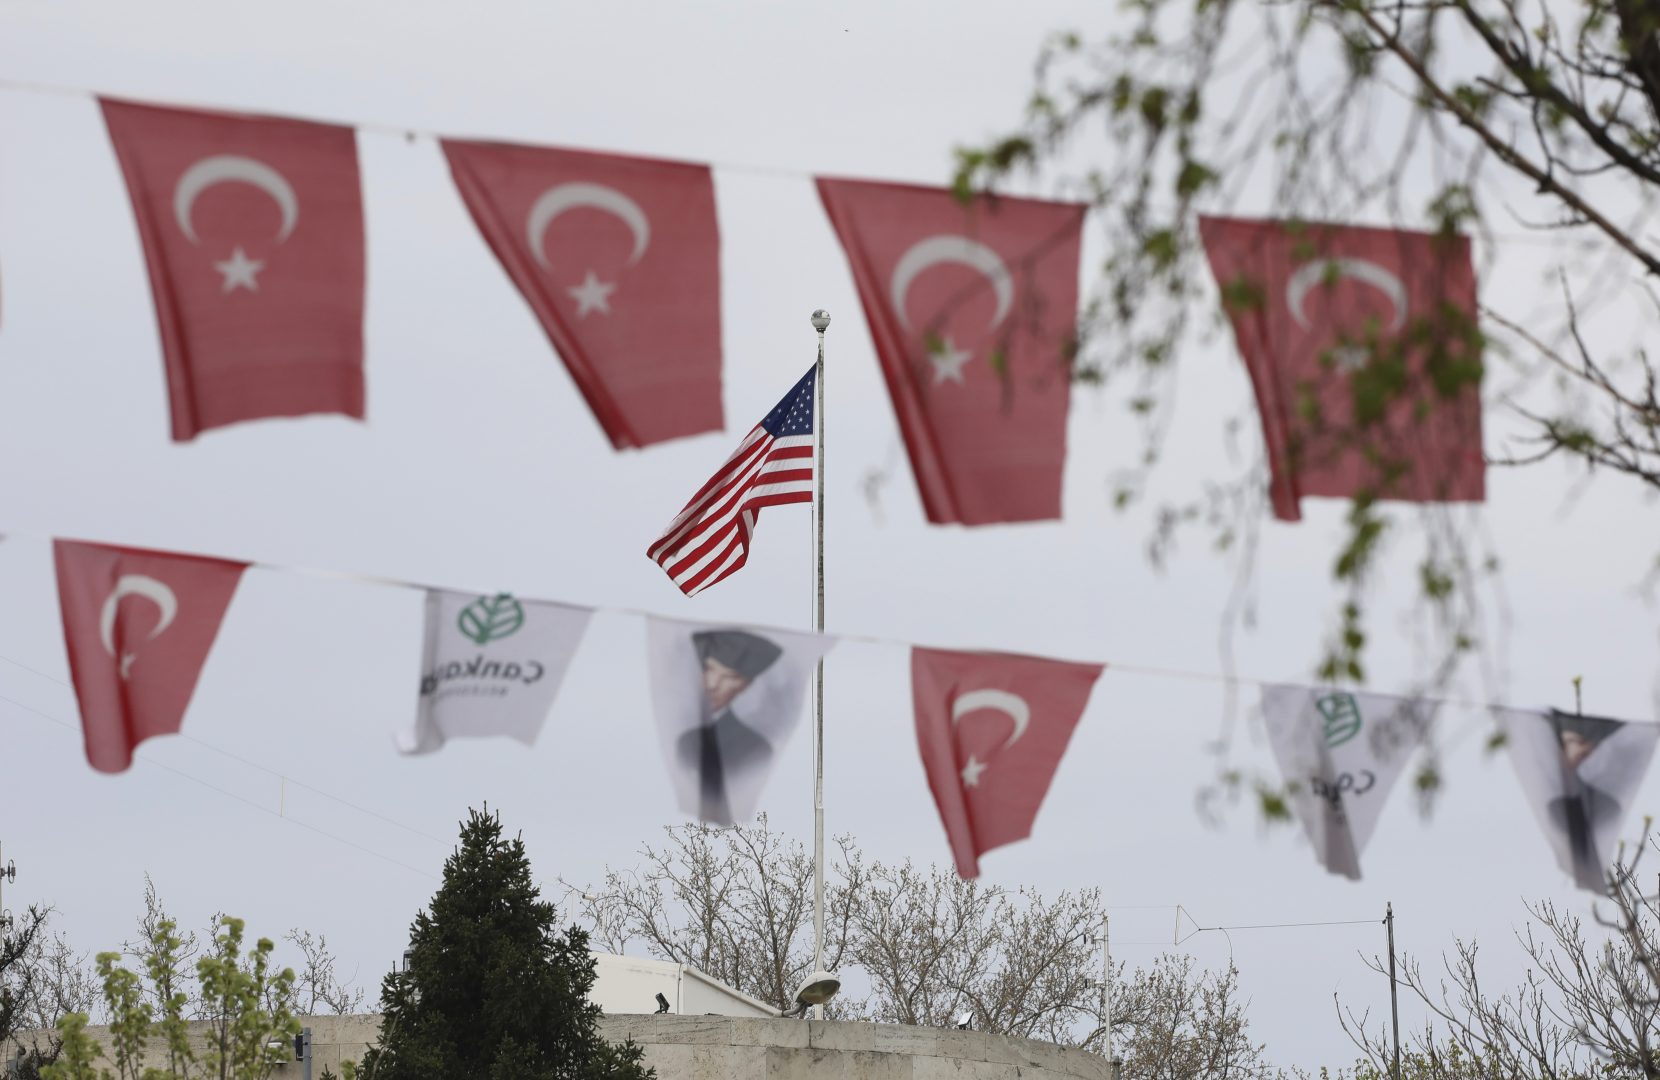 Turkish flags and banners depicting Mustafa Kemal Ataturk, the founder of modern Turkey, decorate a street outside the United States embassy in Ankara, Turkey, Sunday, April 25, 2021. Turkey's foreign ministry has summoned the U.S. Ambassador in Ankara to protest the U.S. decision to mark the deportation and killing of Armenians during the Ottoman Empire as 